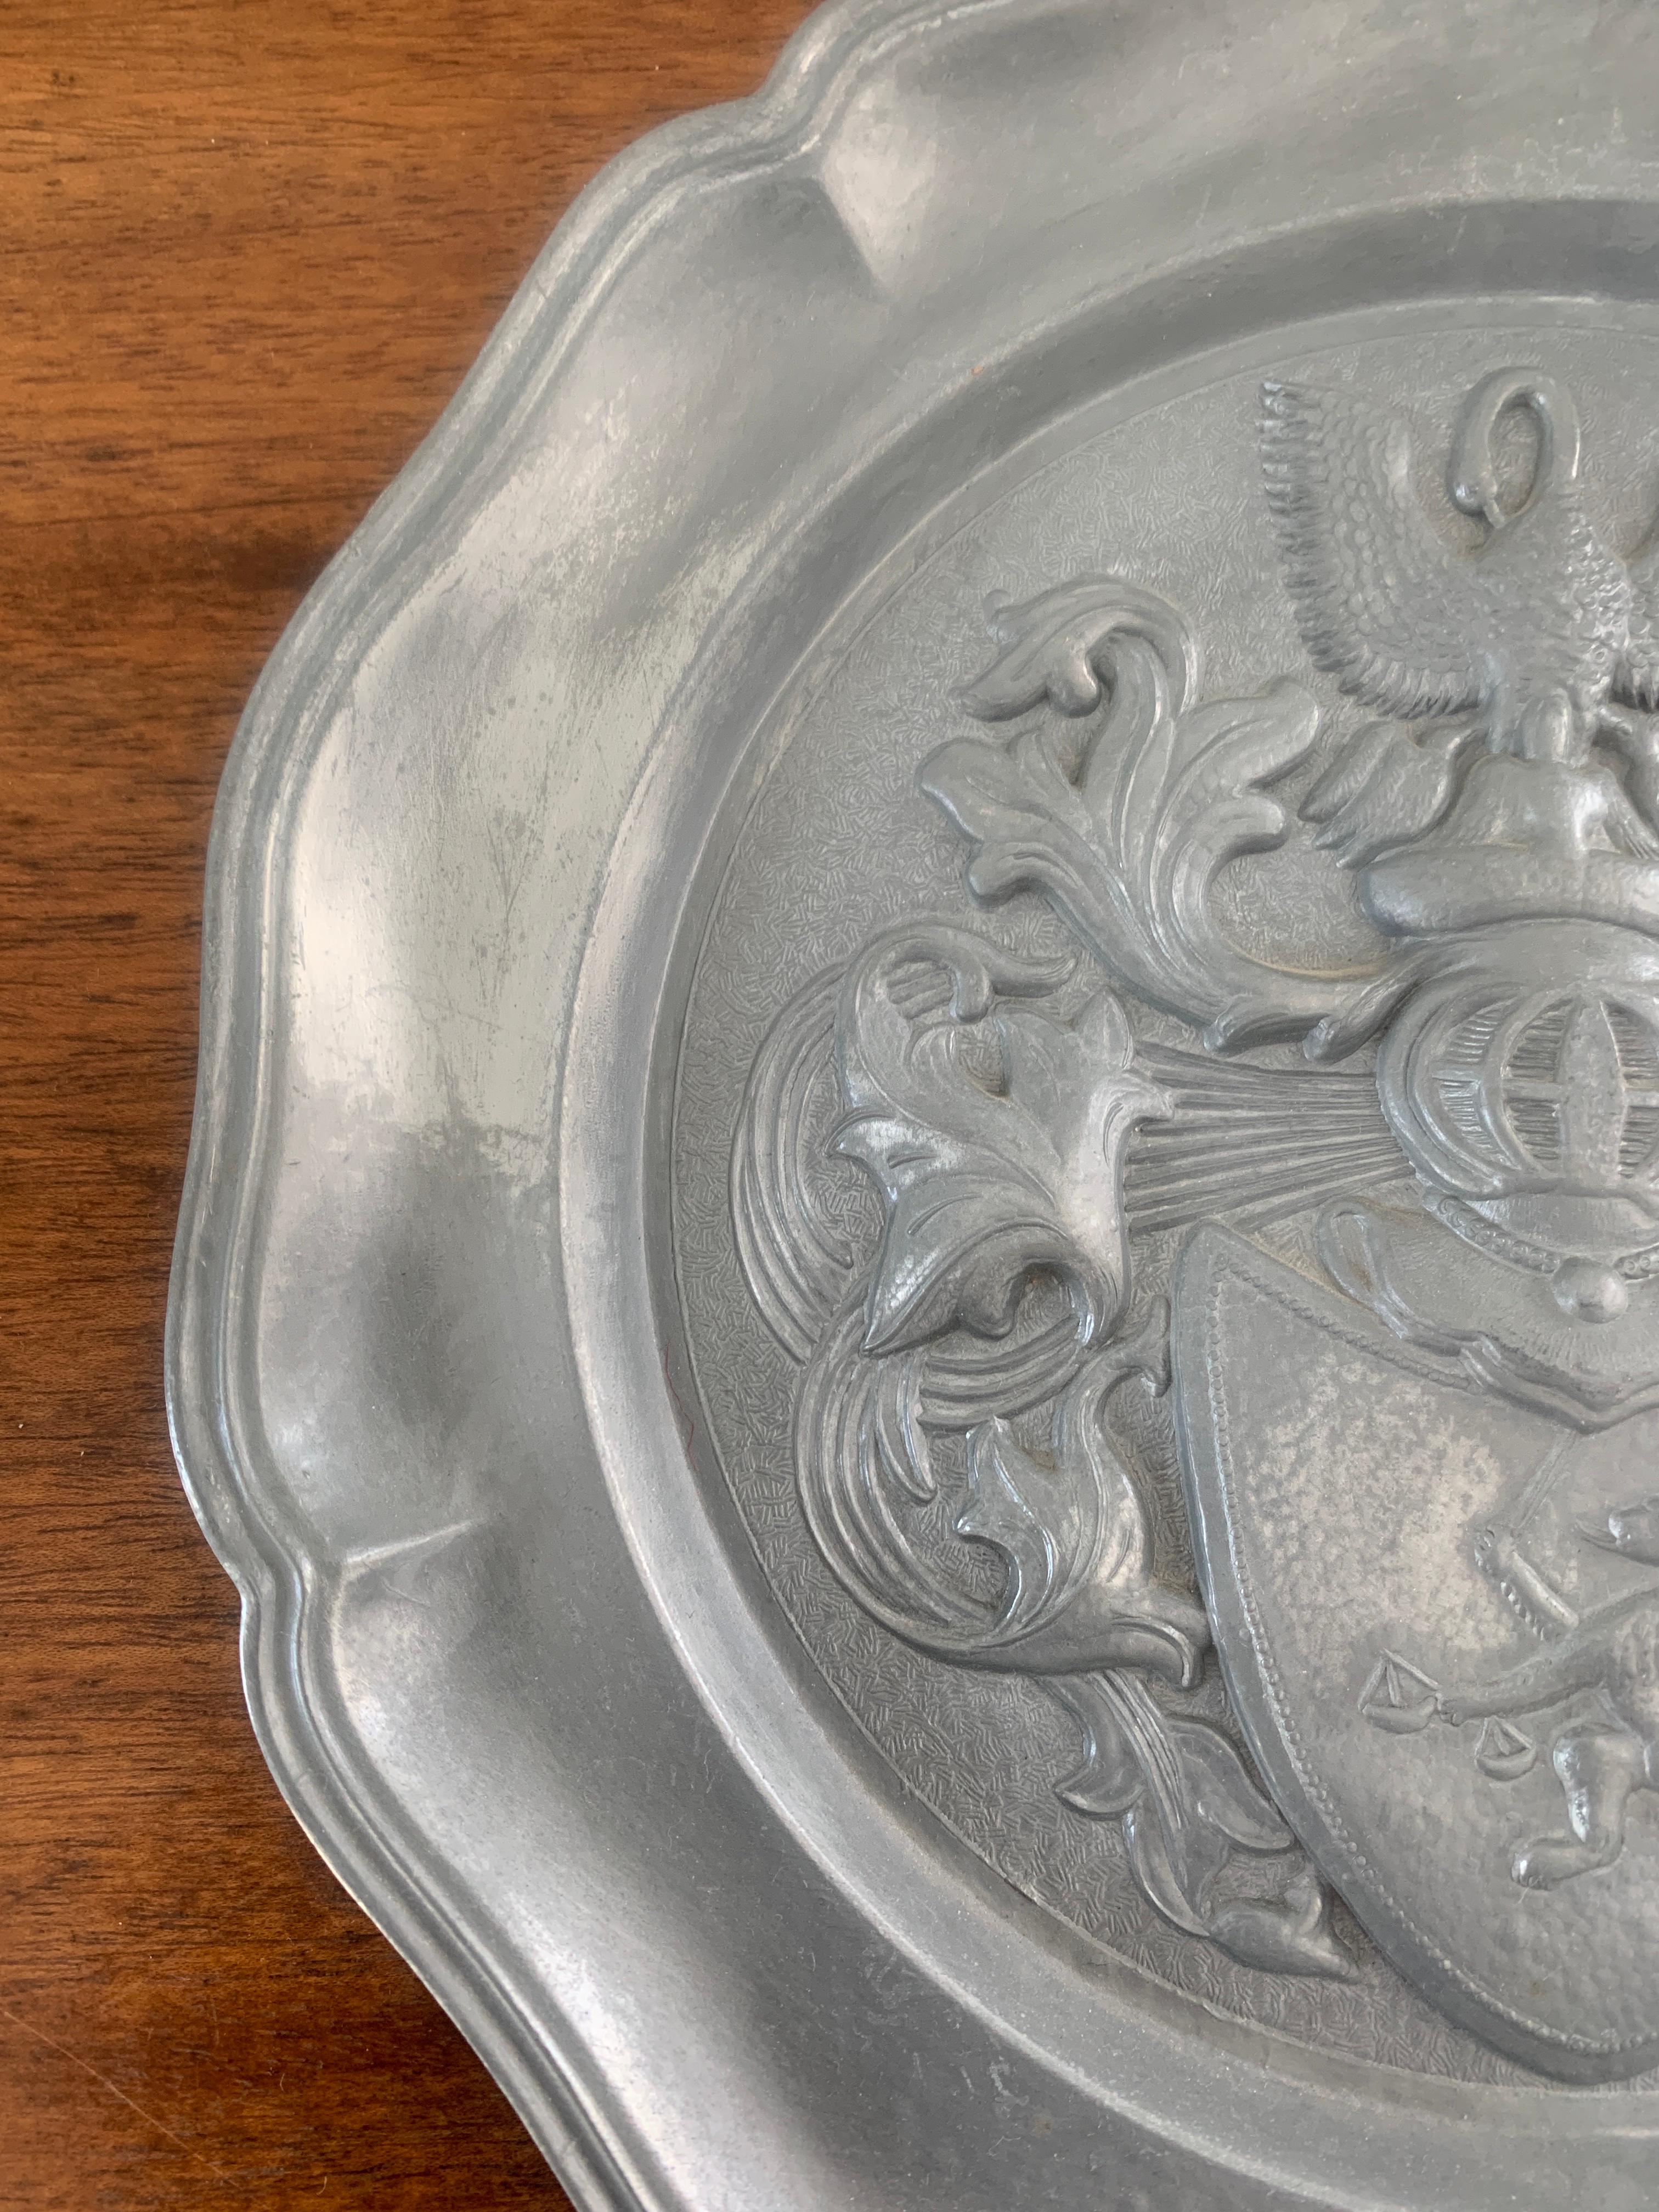 An early 20th century German pewter wall plate with a family crest consisting of a lion with sword on a shield culminating in a mother pelican feeding her babies. The symbolism of the mother pelican feeding her baby pelicans is part of an ancient